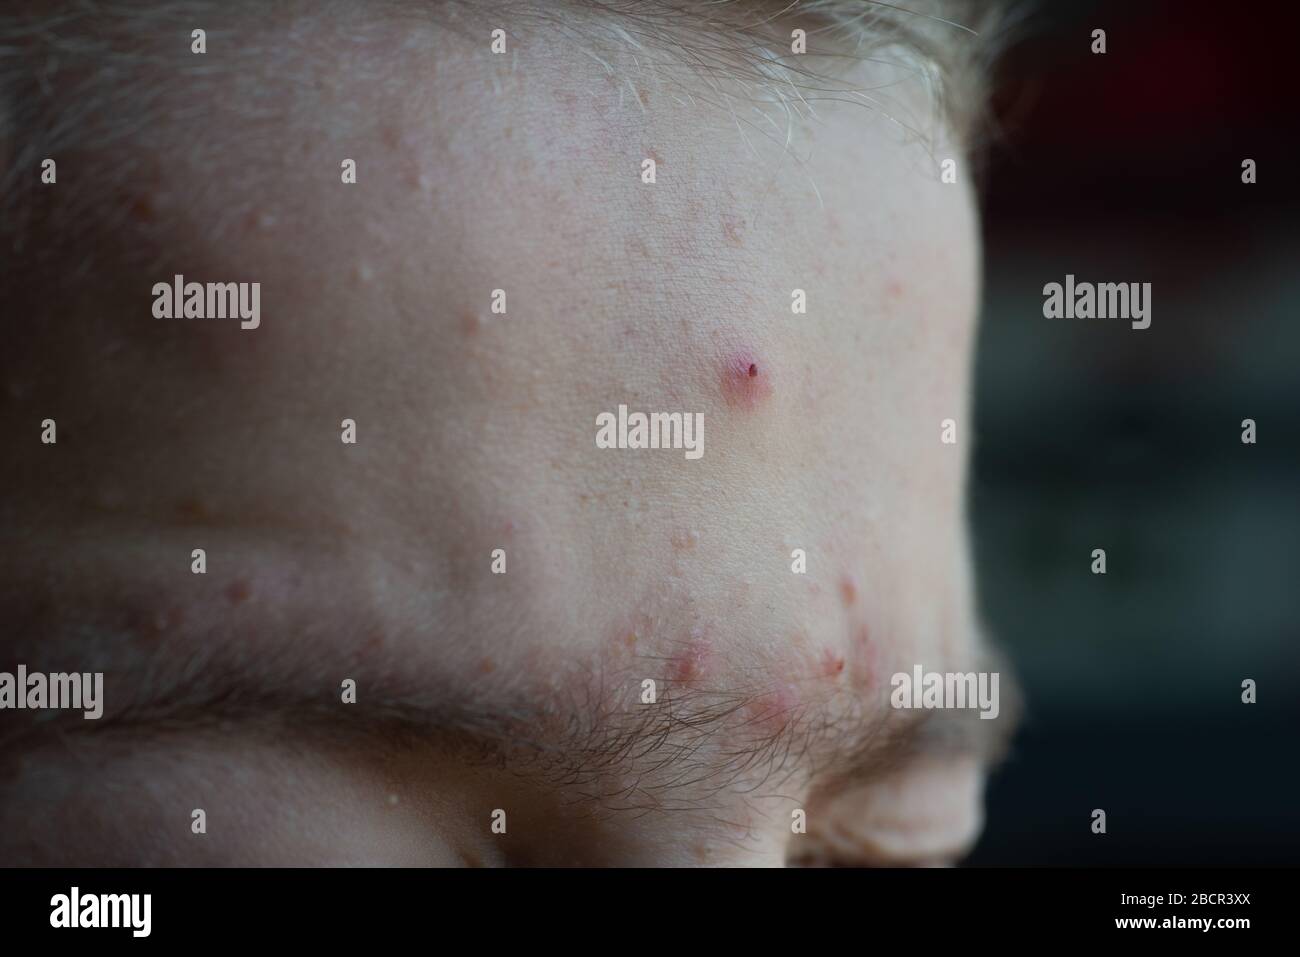 teenage boy with acné spots on forehead close up..skin care. Stock Photo